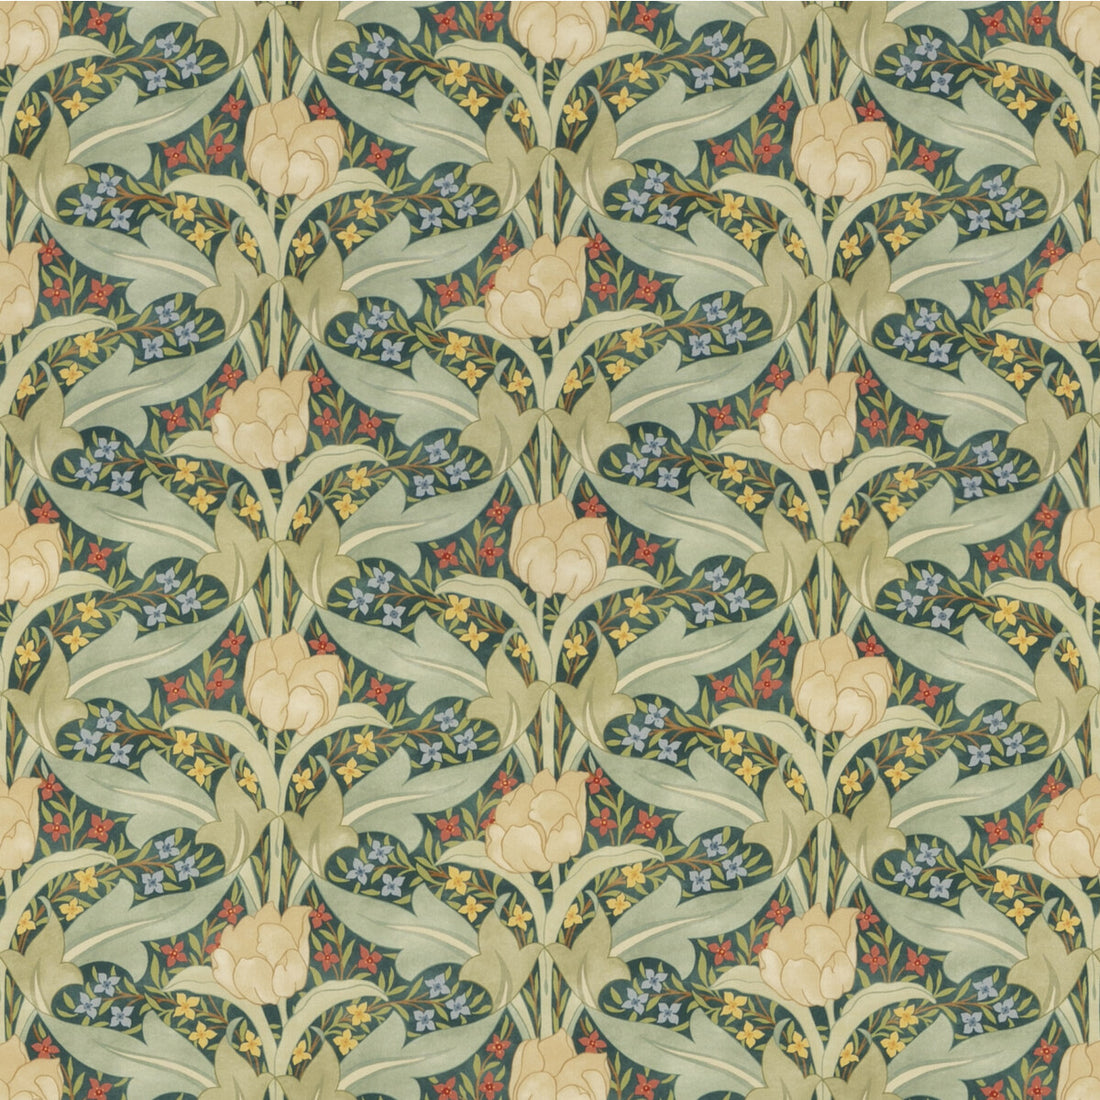 Tulip &amp; Jasmine Cotton fabric in emerald color - pattern BP10977.1.0 - by G P &amp; J Baker in the Original Brantwood Fabric collection